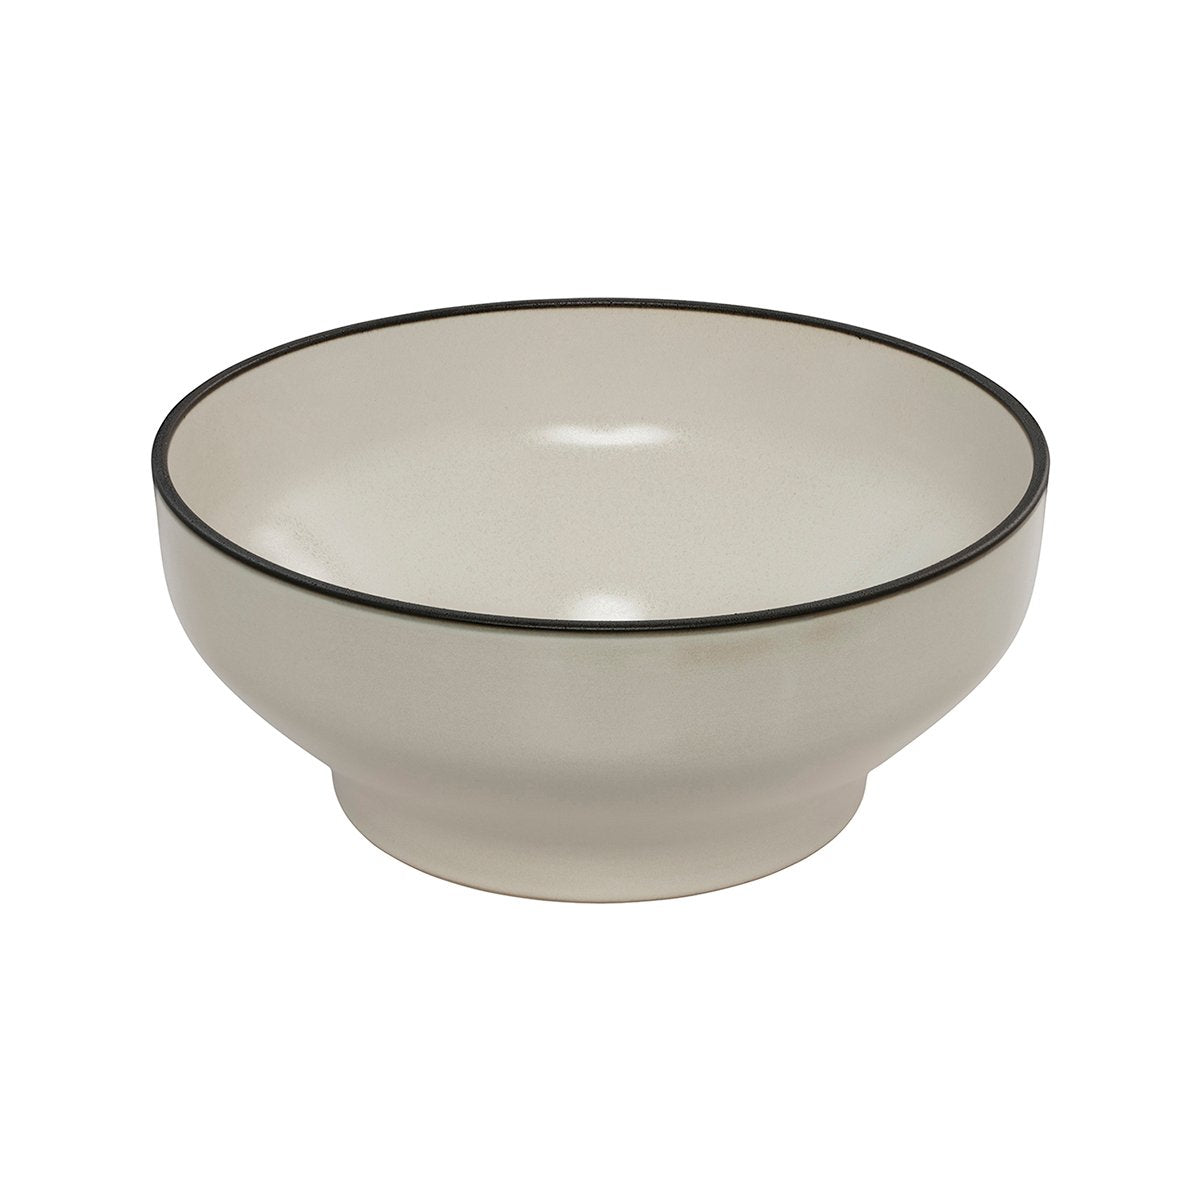 Round Bowl - 212Mm, Dusted White from Luzerne. made out of Ceramic and sold in boxes of 3. Hospitality quality at wholesale price with The Flying Fork! 